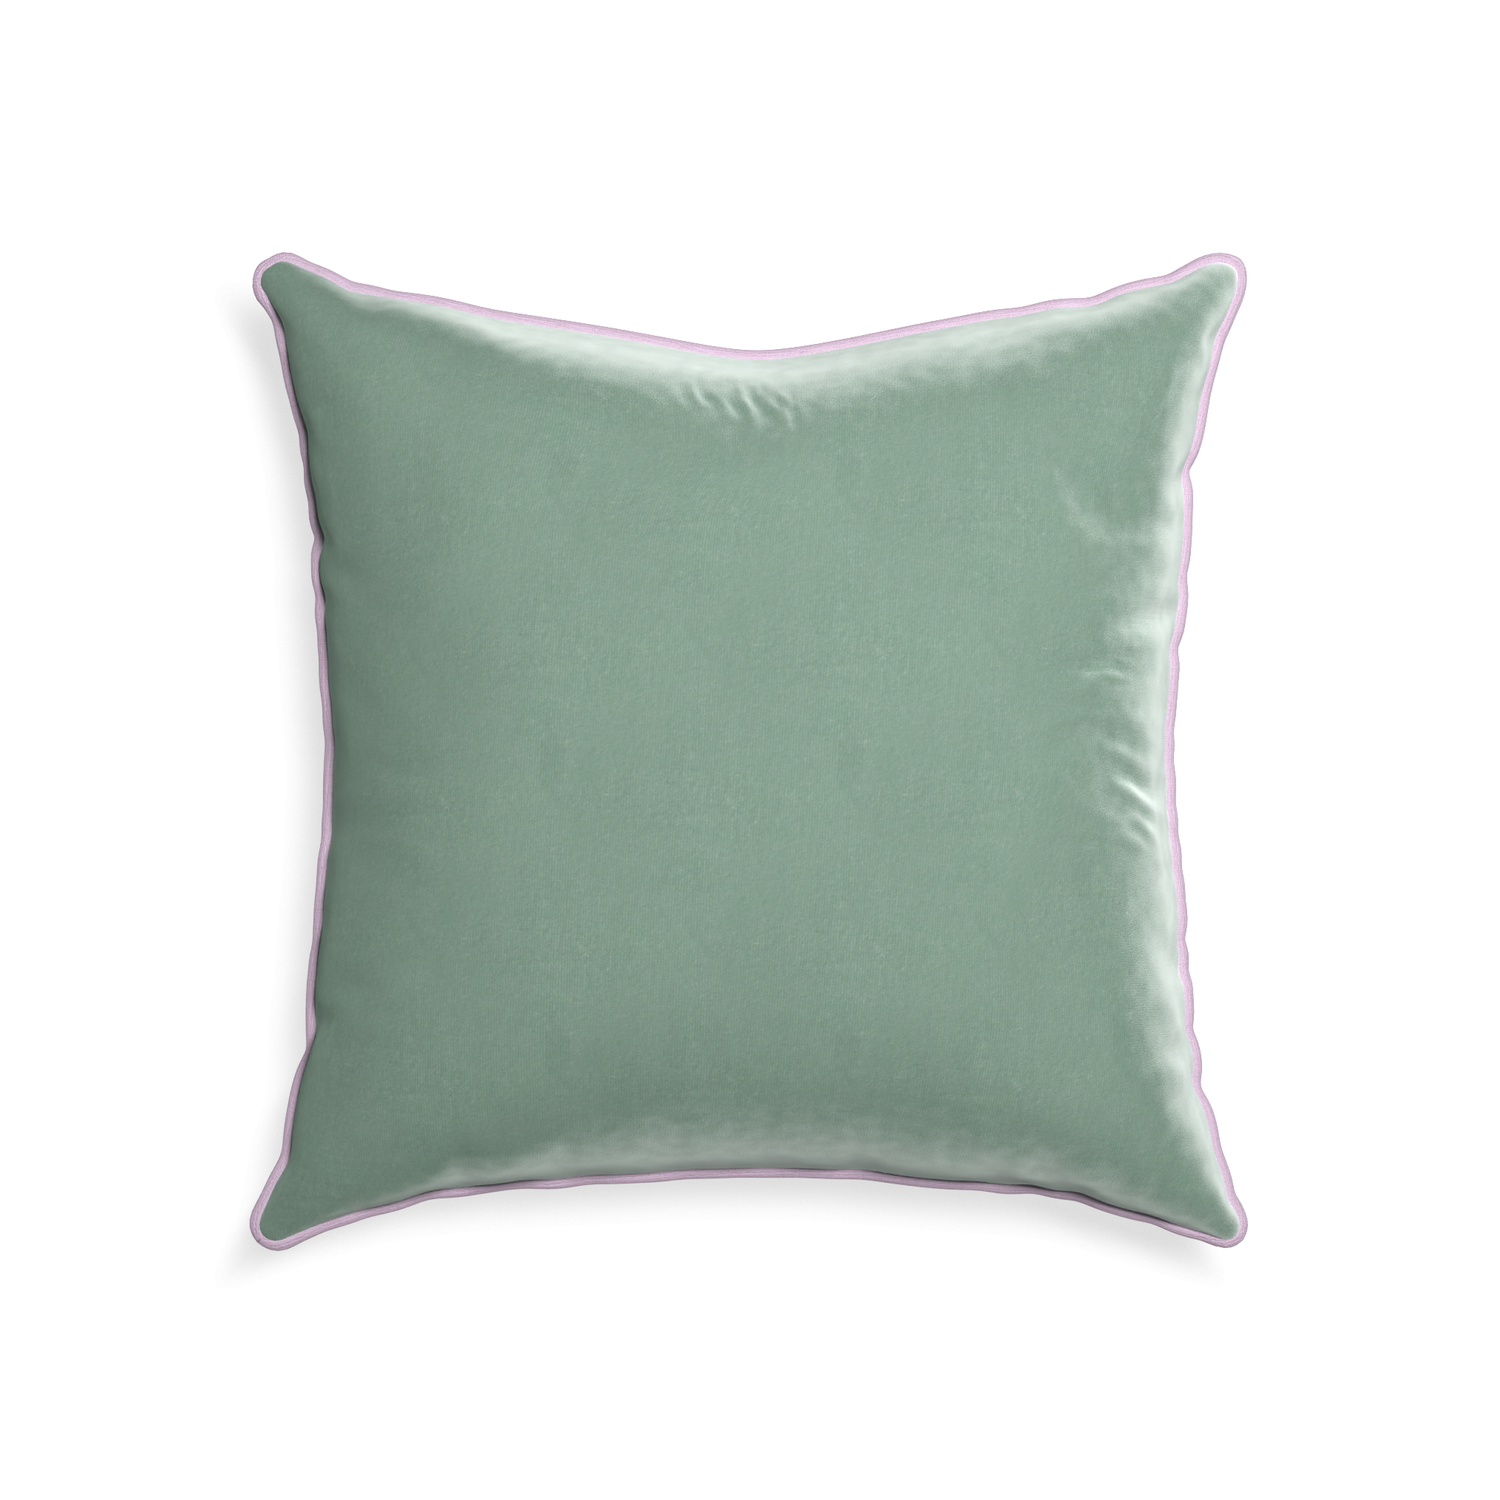 square blue green velvet pillow with lilac piping